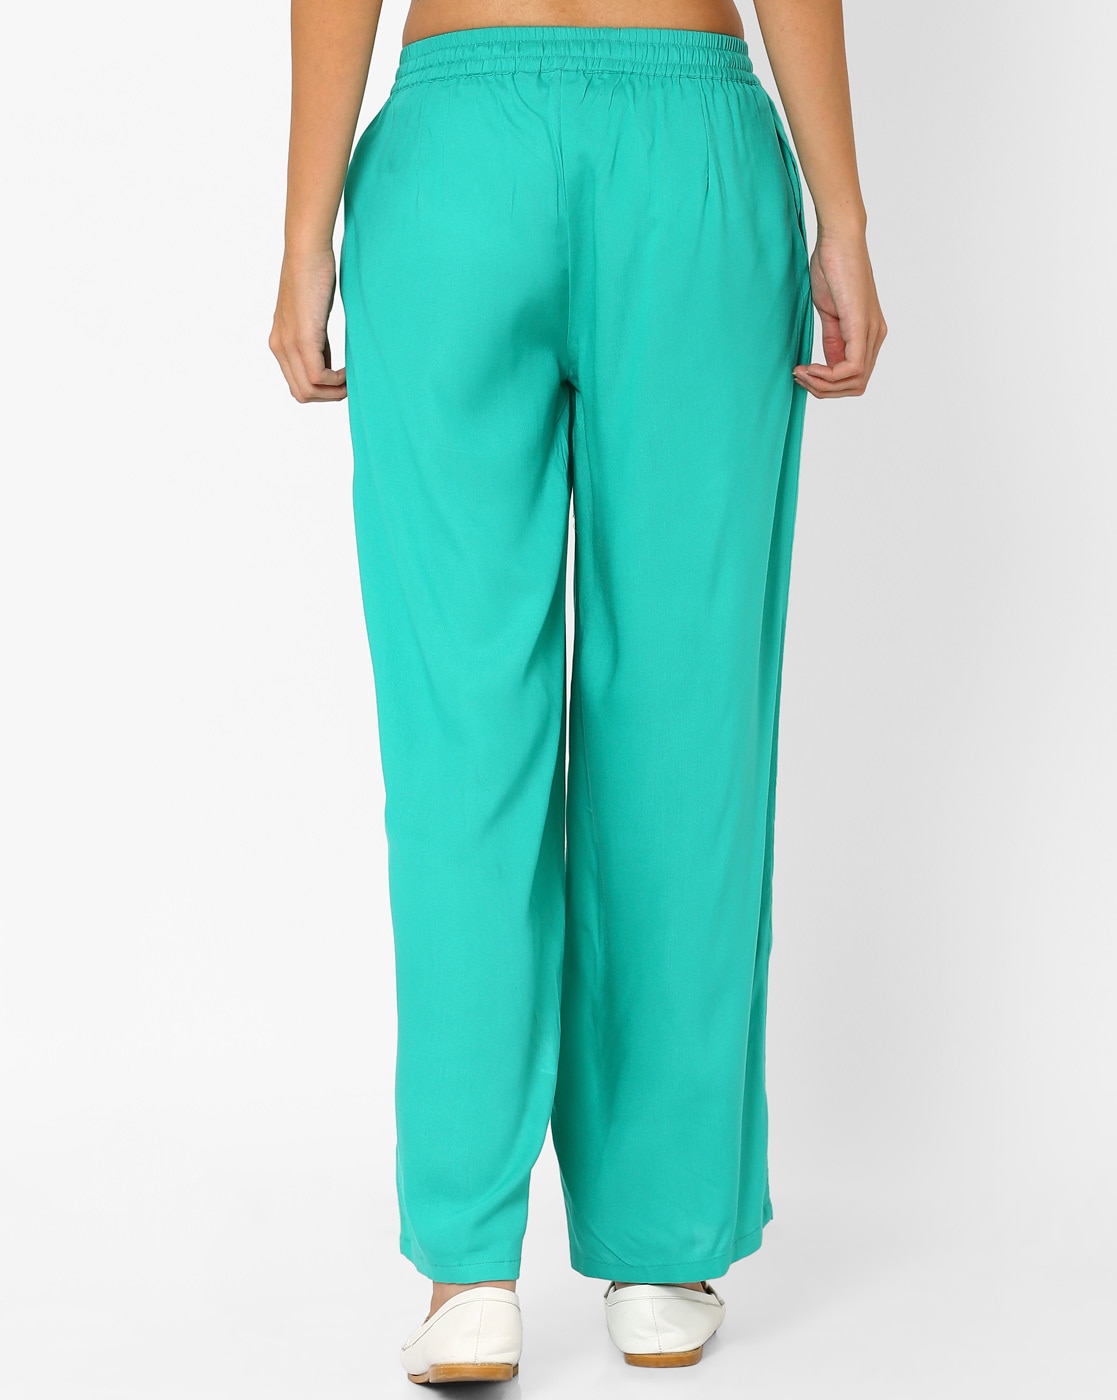 Buy Creamcoloured Trousers  Pants for Women by AJIO Online  Ajiocom